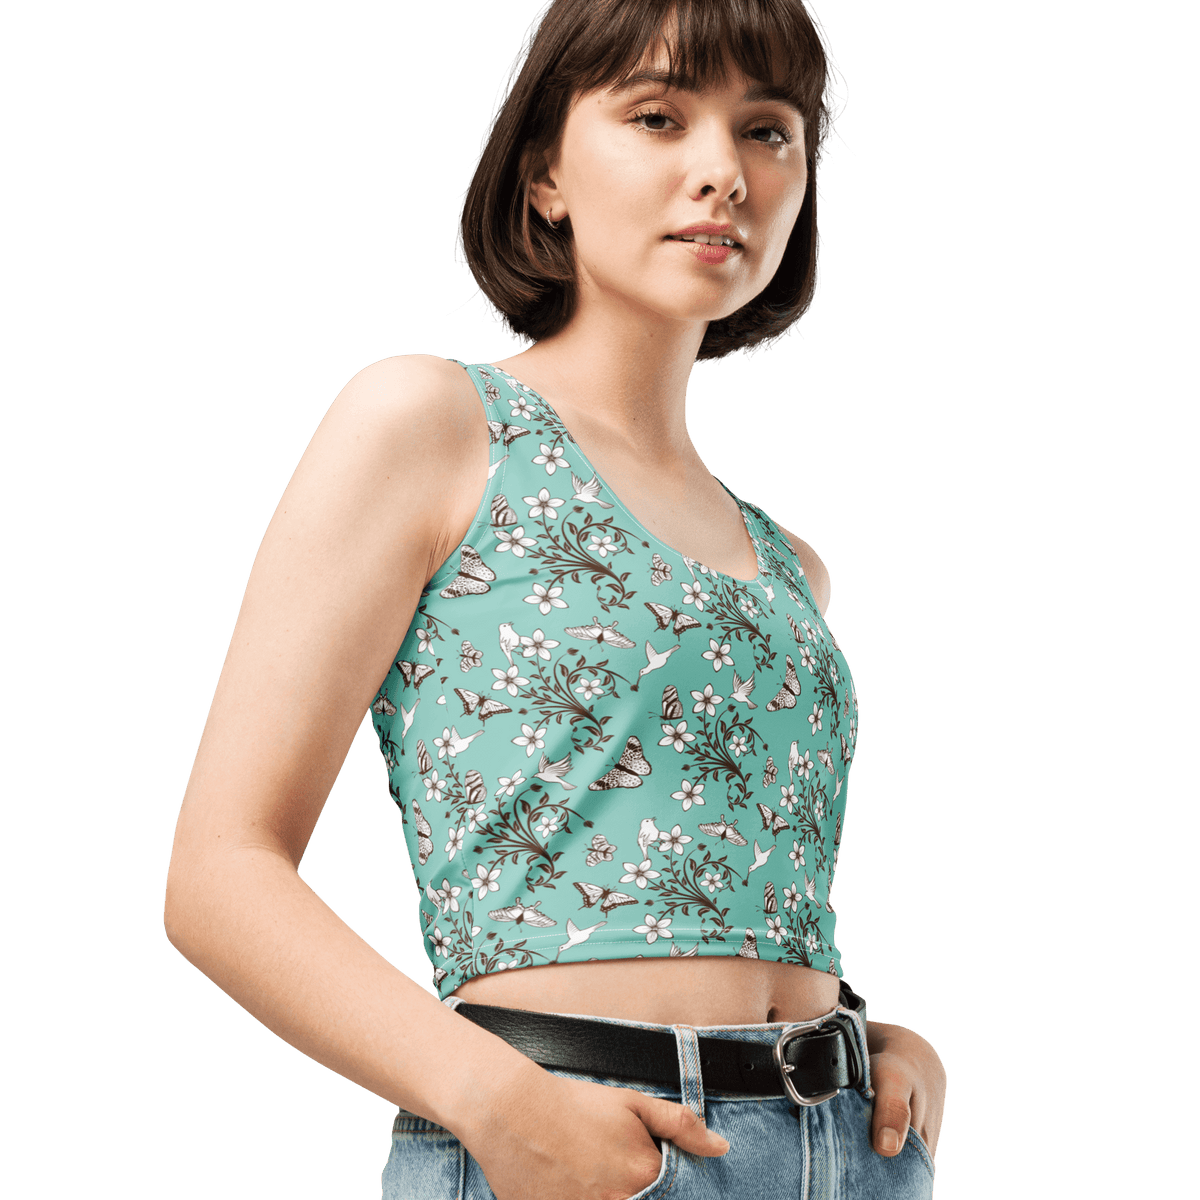 Floral Fashion, Blooms Crop Top, Garden Vibes, Petal Perfection, Flower Power, Botanical Beauty, Blossom Chic, Nature-Inspired, Trendy Florals, Statement Piece